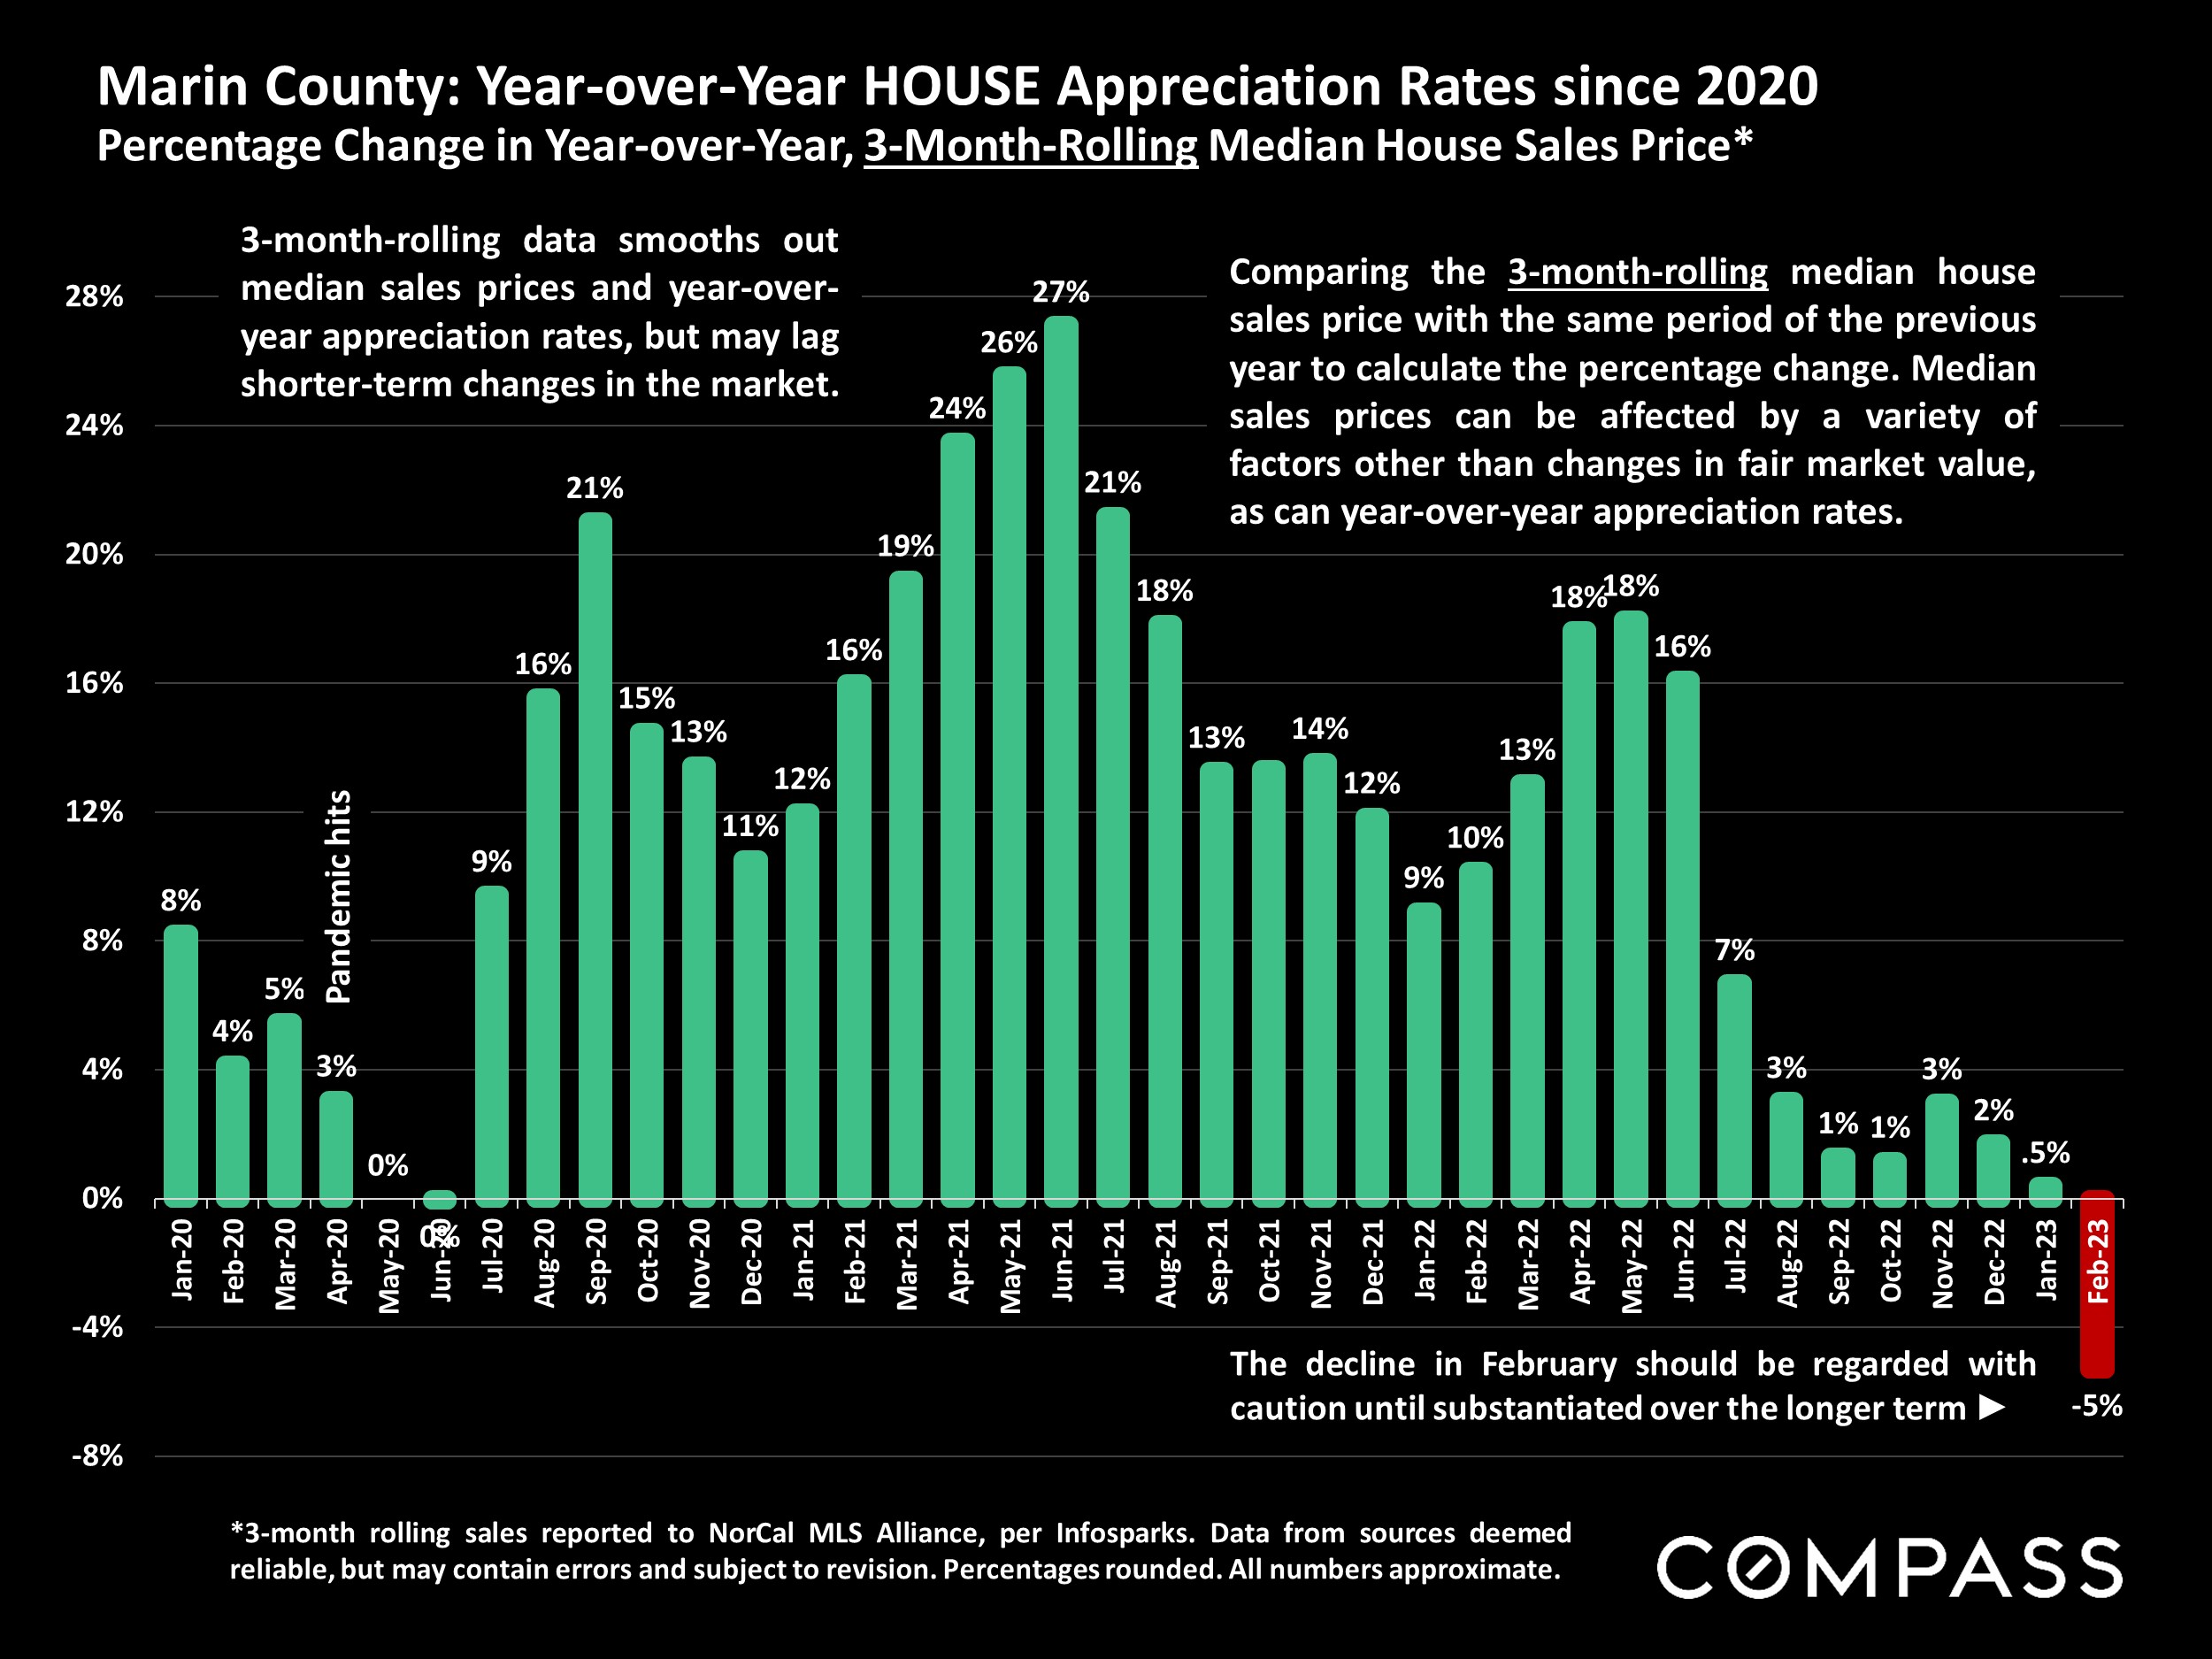 Marin County: Year-over-Year HOUSE Appreciation Rates since 2020